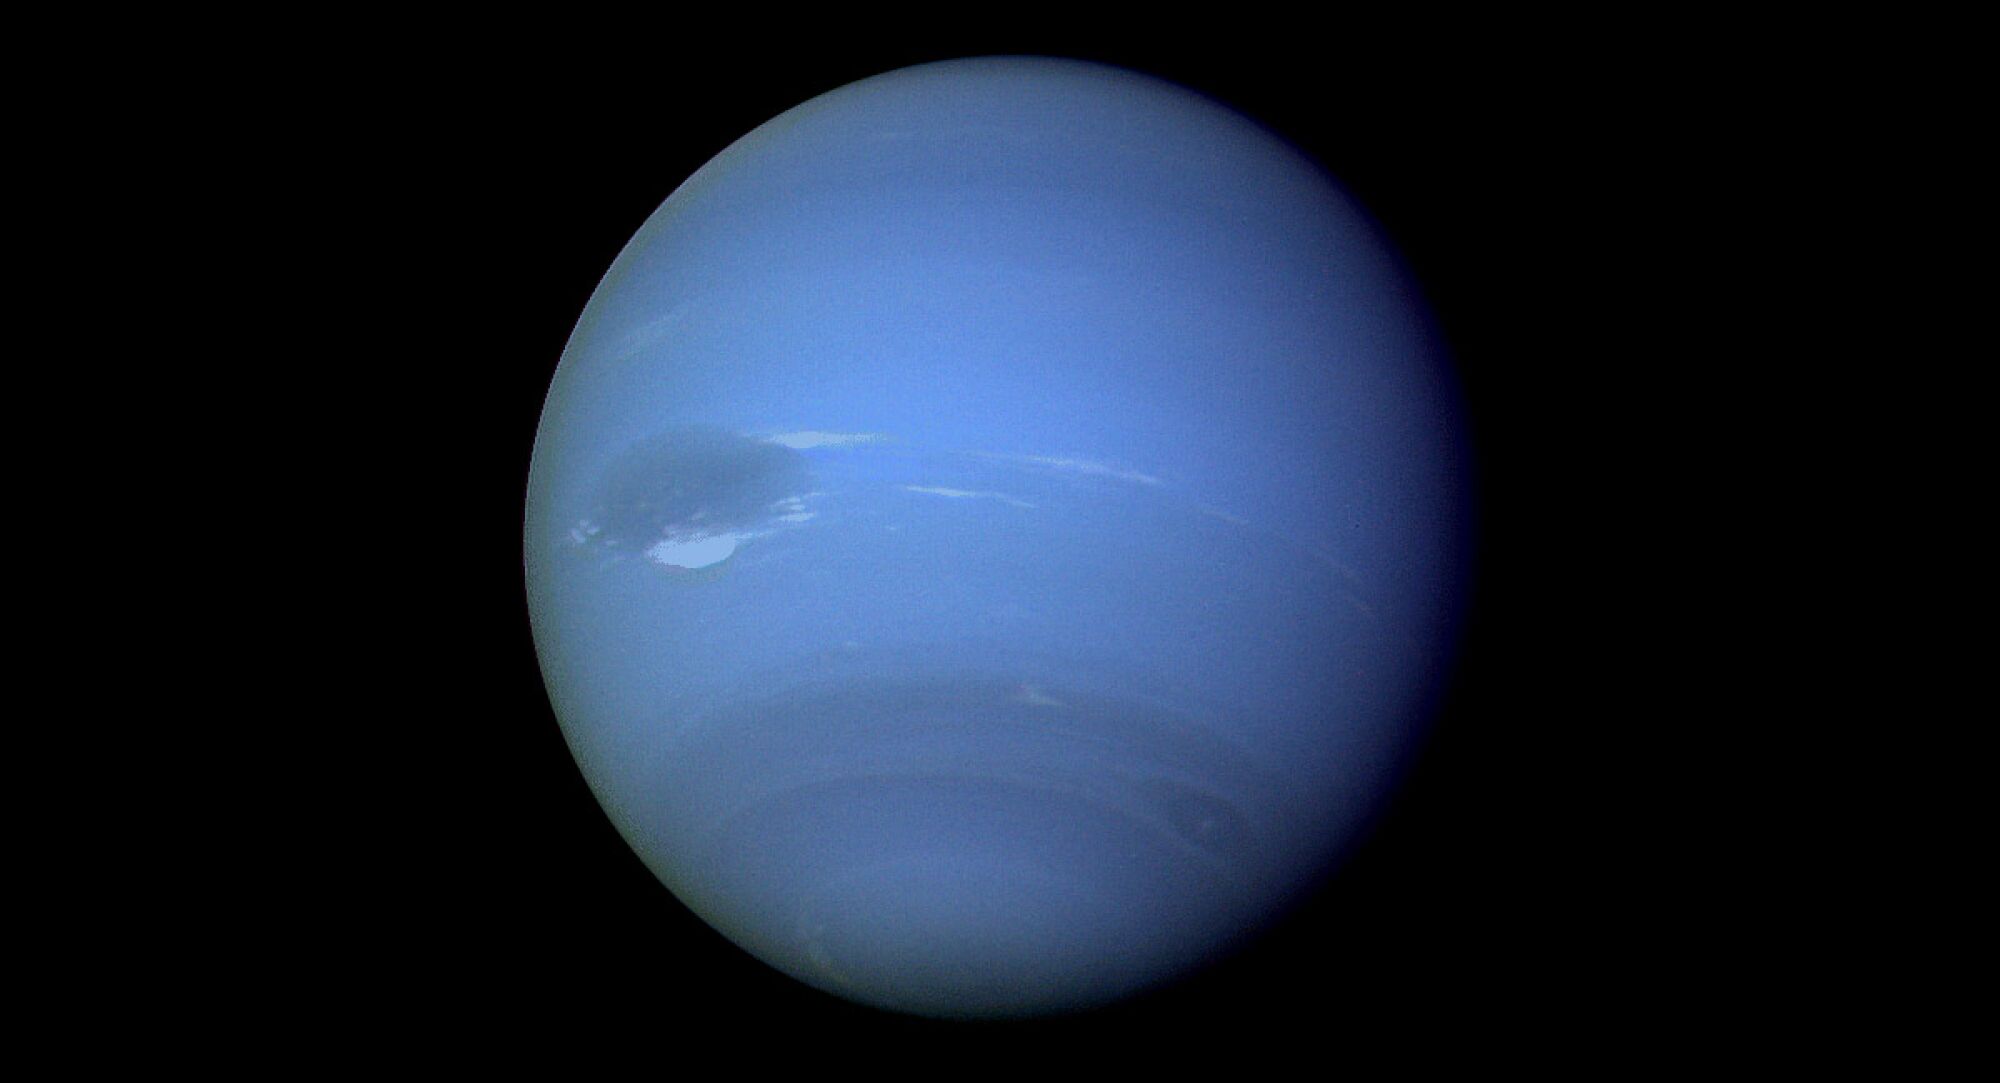 Image of the blue planet Neptune.